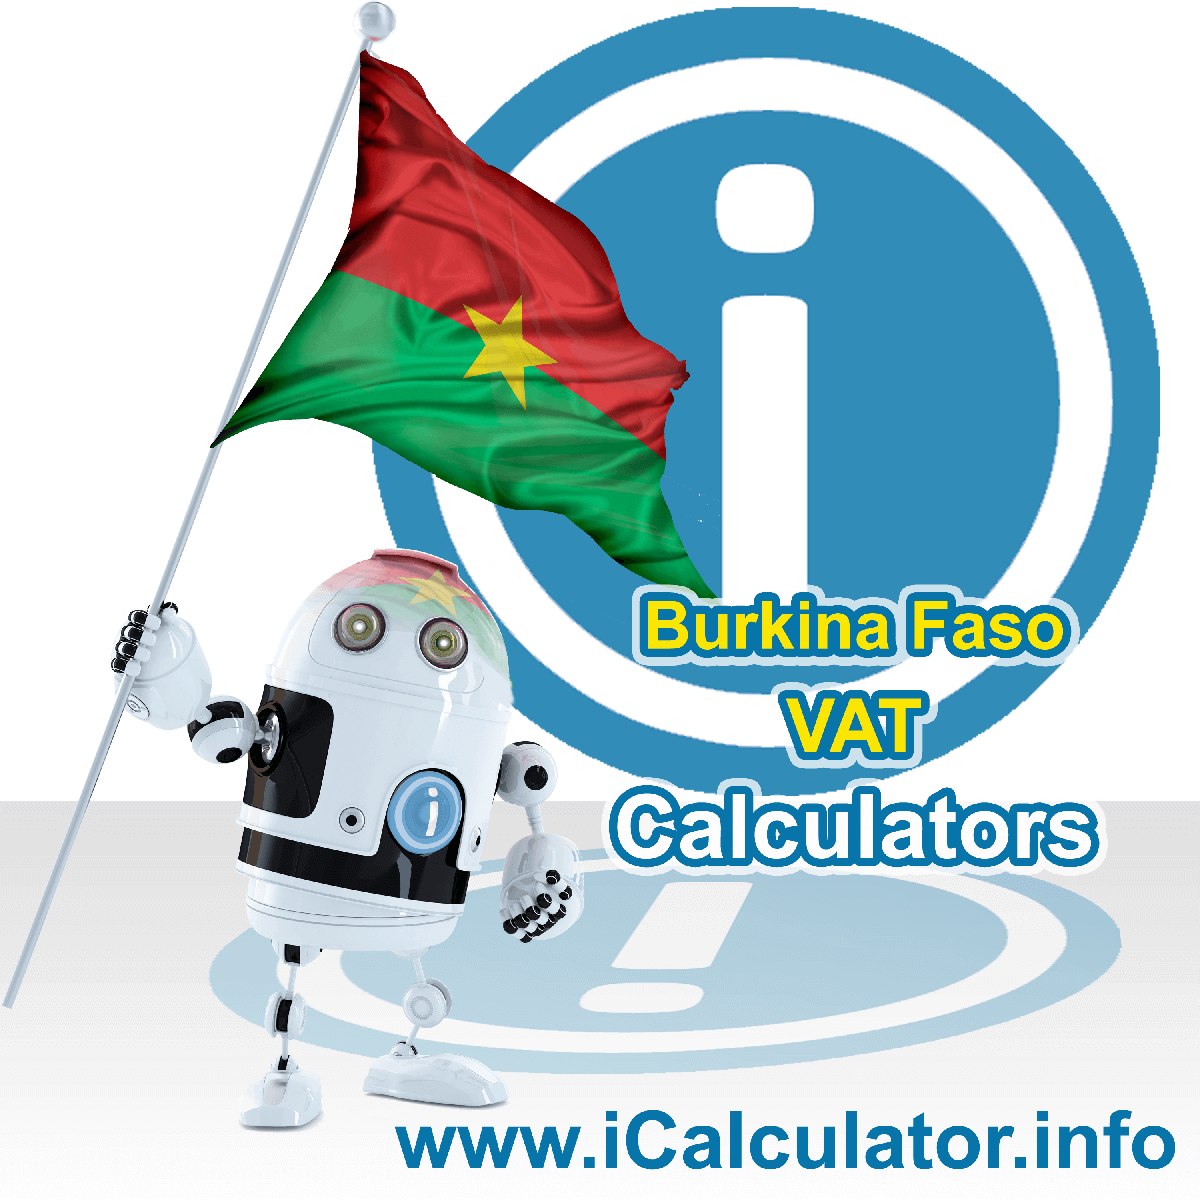 Burkina Faso VAT Calculator. This image shows the Burkina Faso flag and information relating to the VAT formula used for calculating Value Added Tax in Burkina Faso using the Burkina Faso VAT Calculator in 2022